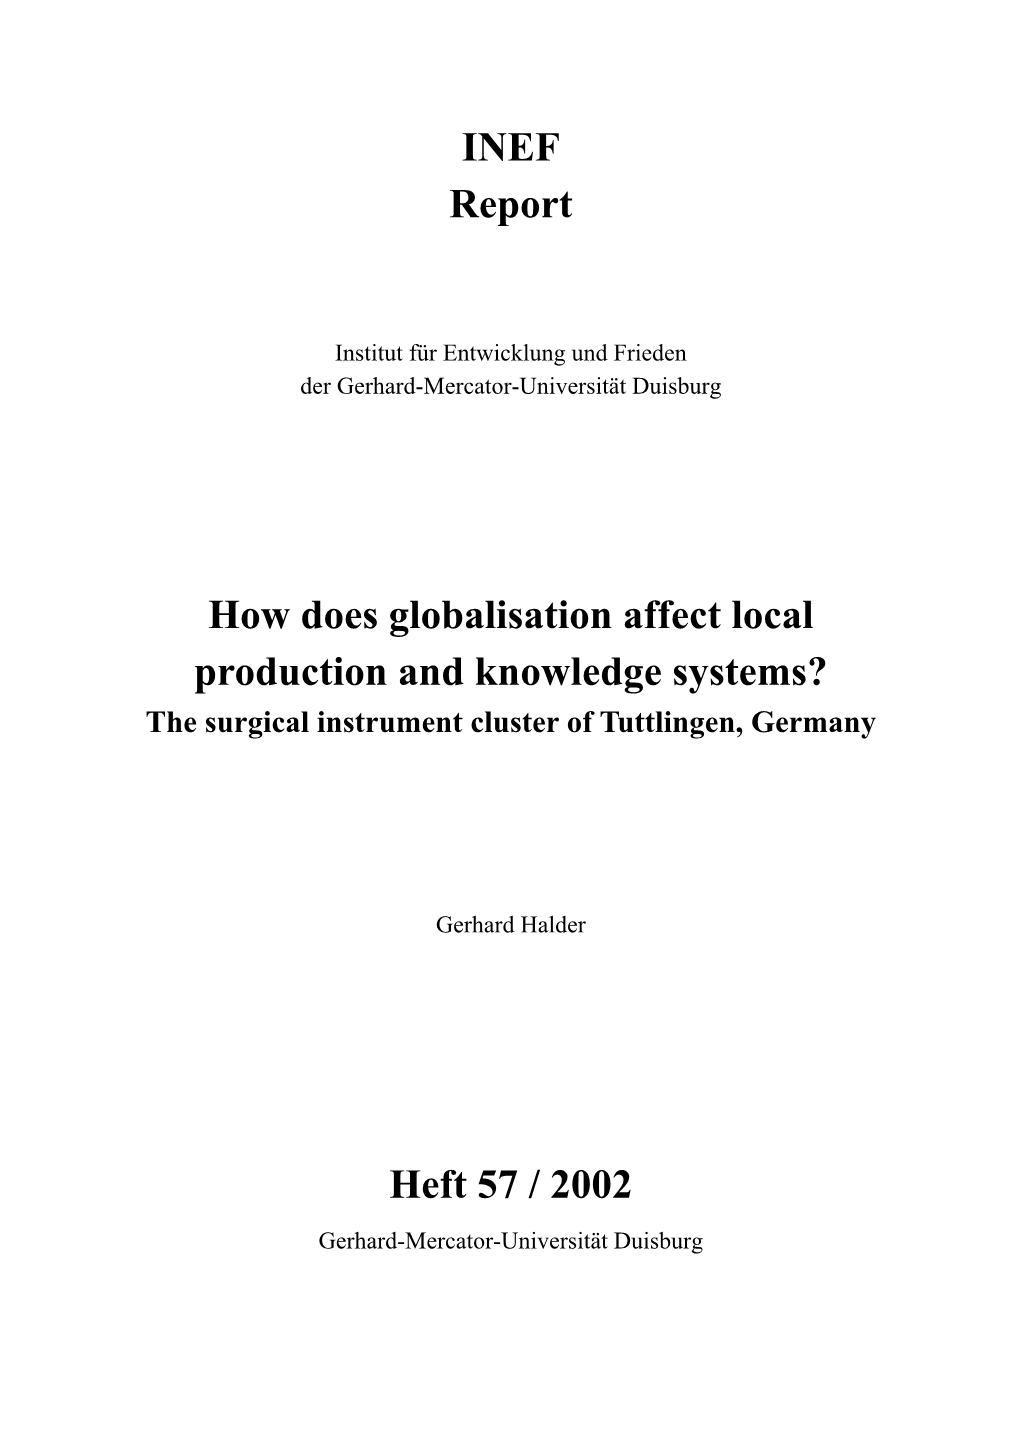 How Does Globalisation Affect Local Production and Knowledge Systems? the Surgical Instrument Cluster of Tuttlingen, Germany